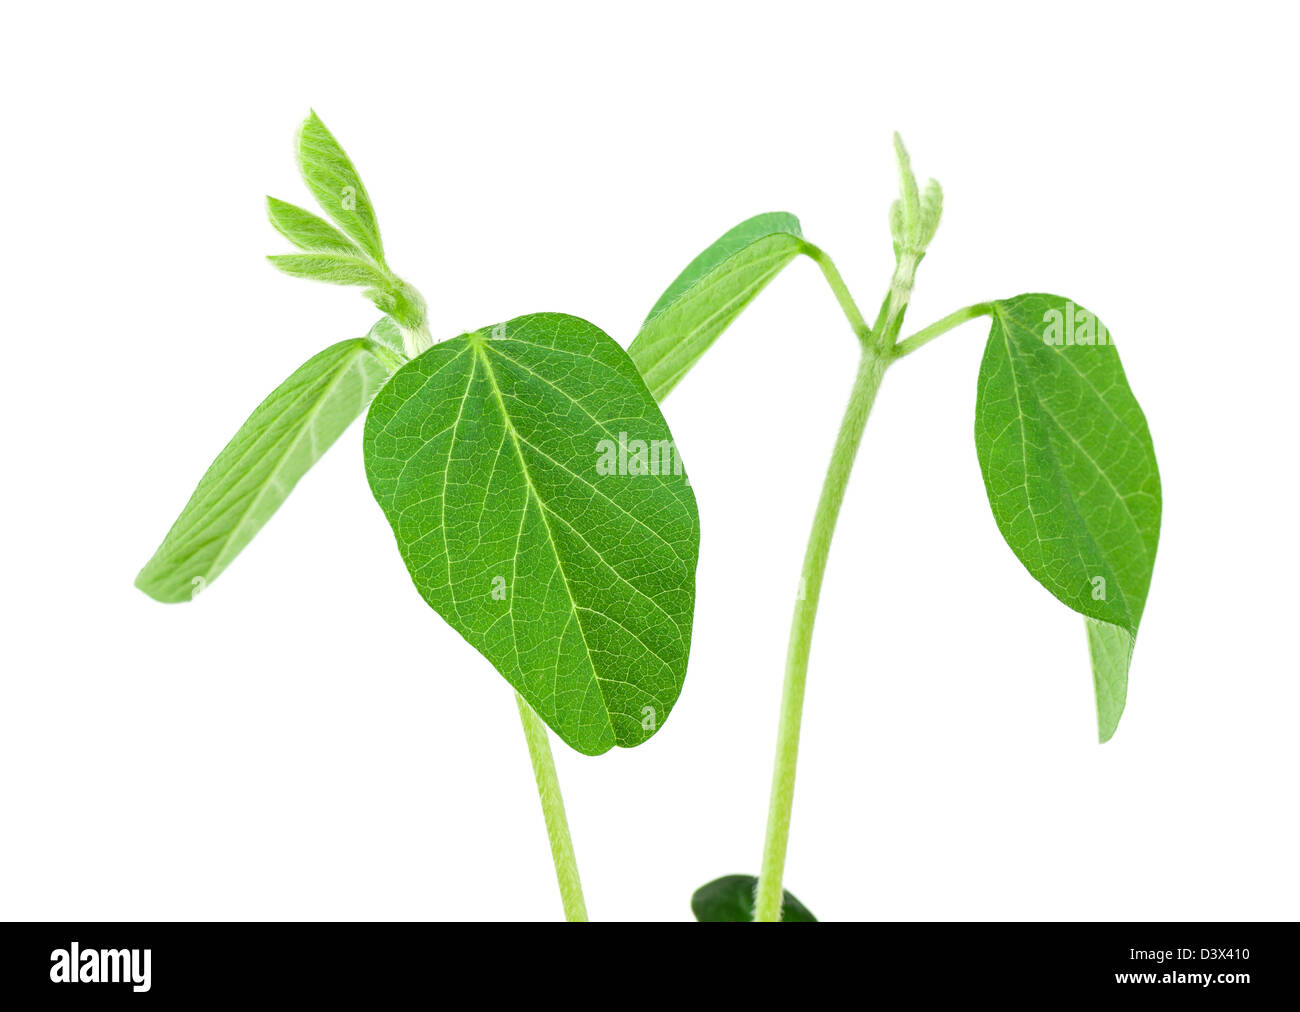 Two soy plants isolated on white background Stock Photo